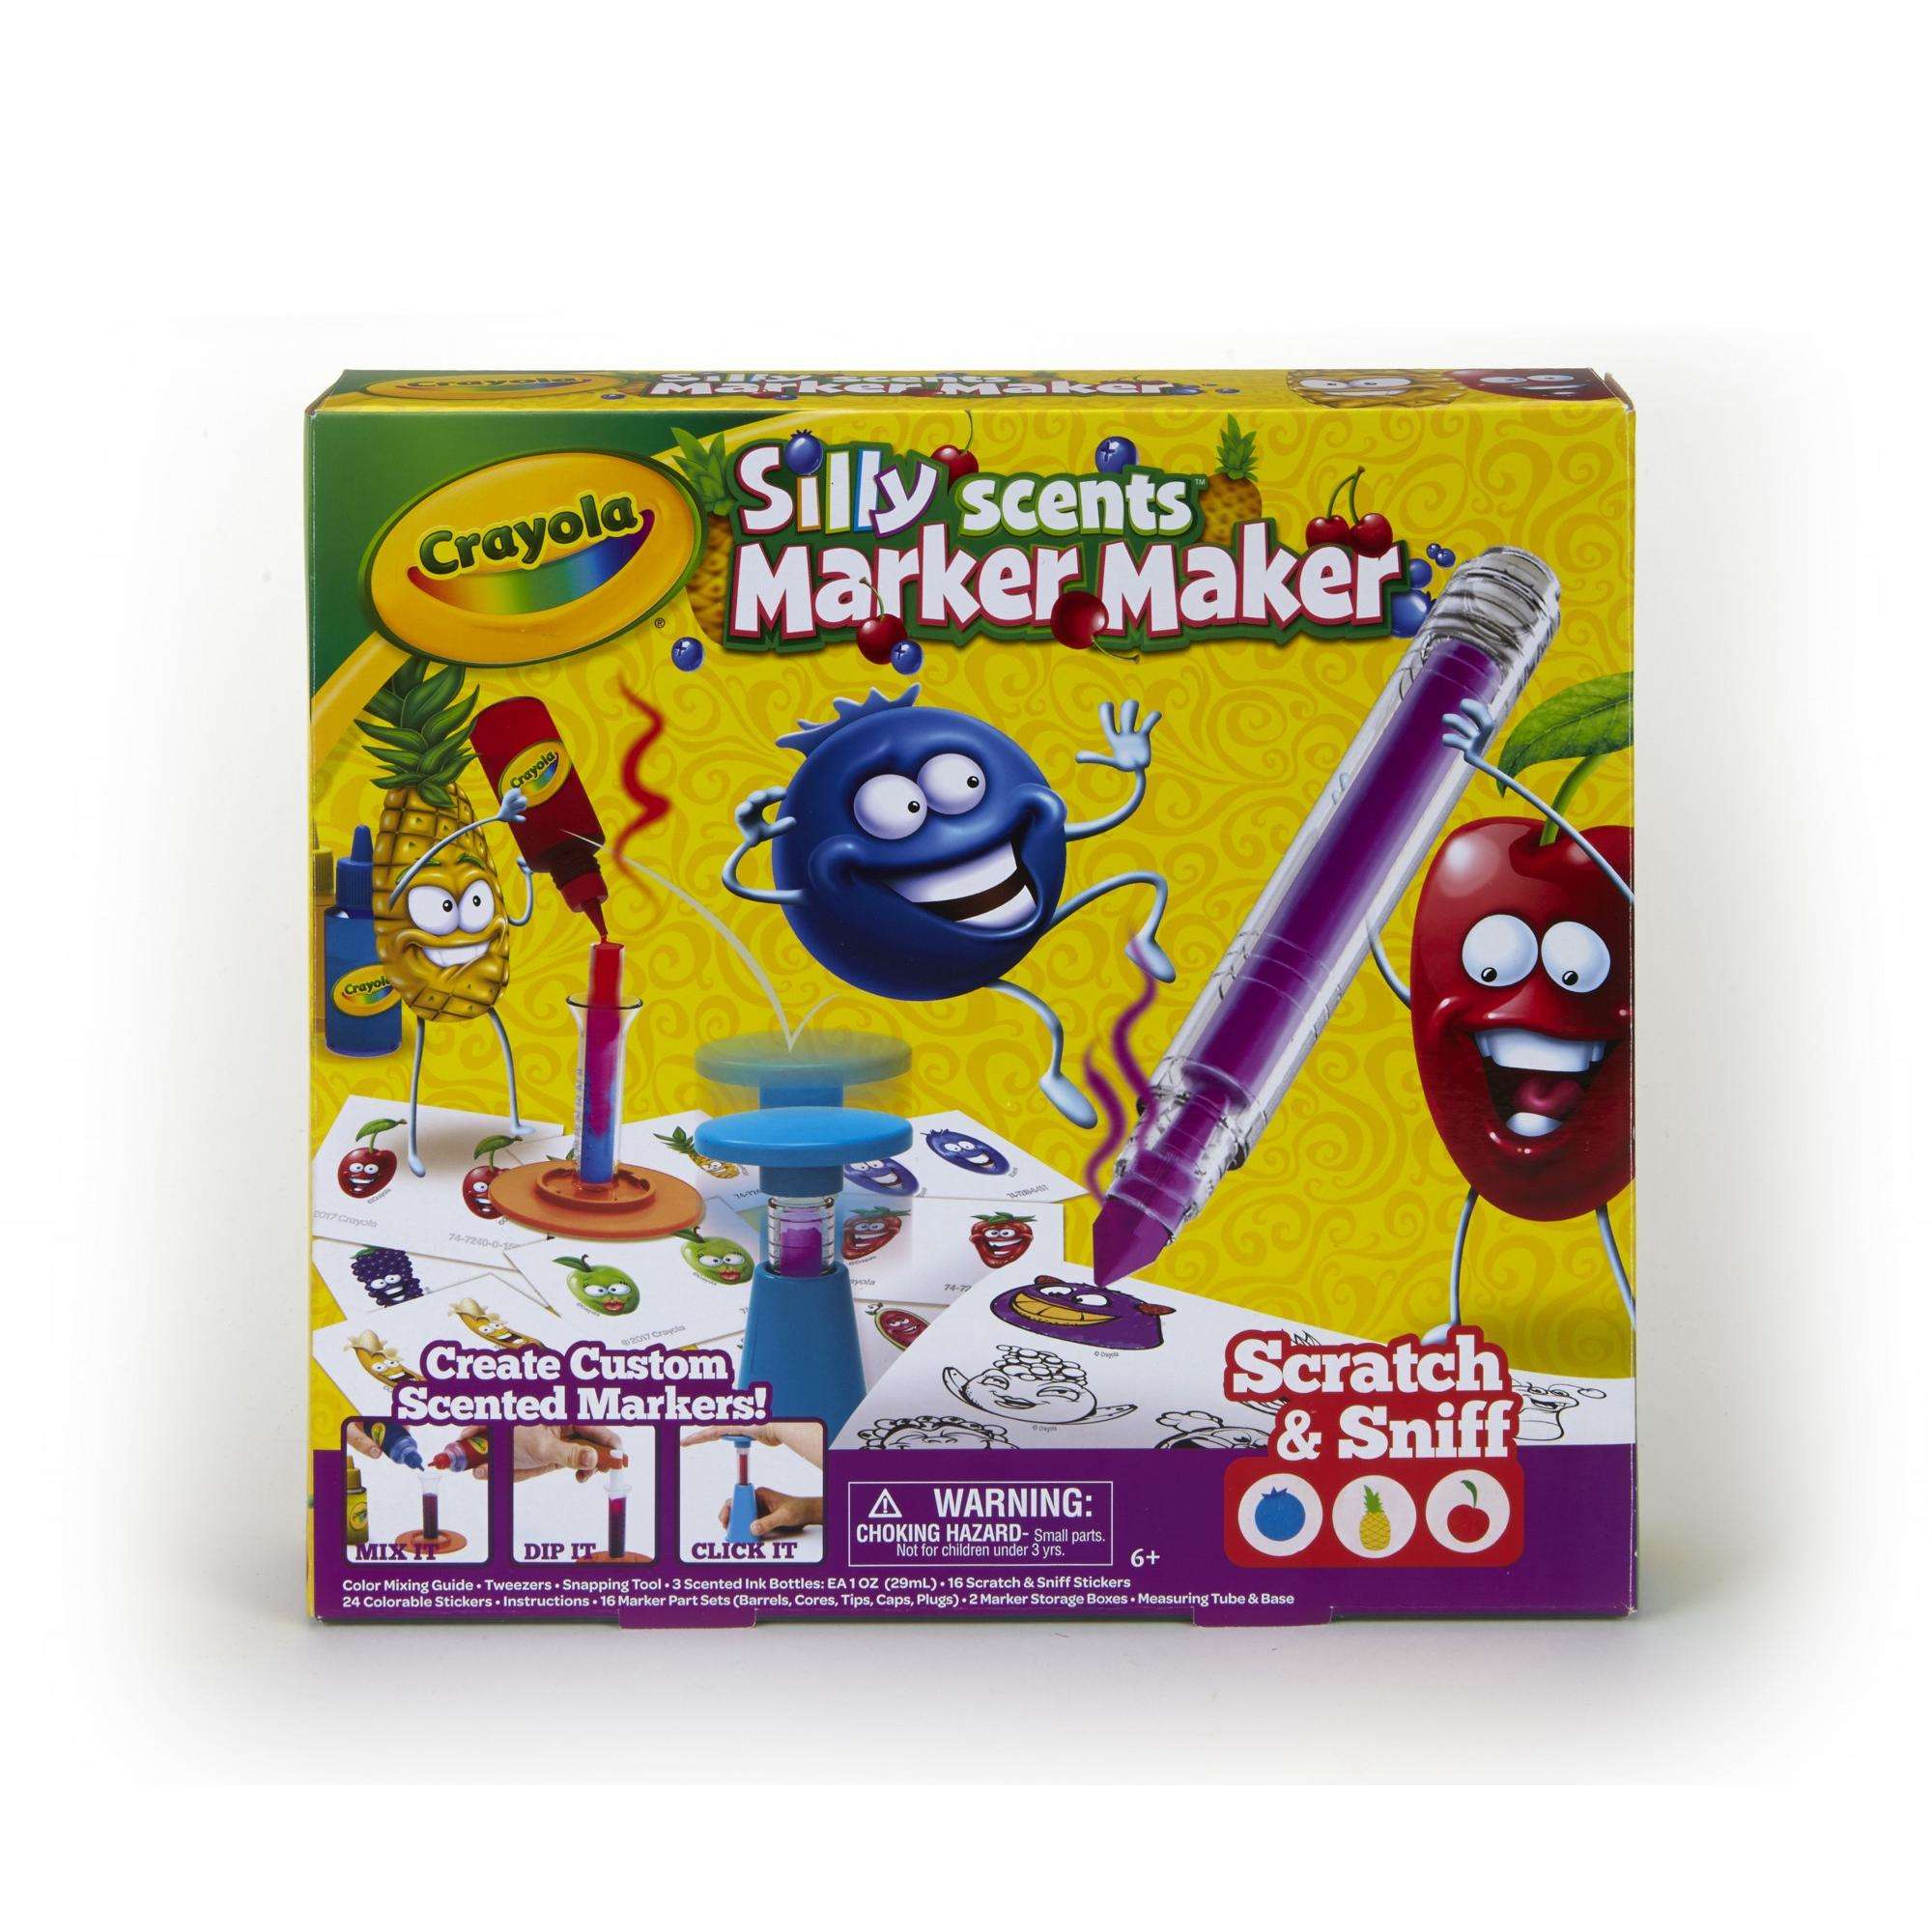 Crayola Silly Scents Marker Maker Kit - image 1 of 11